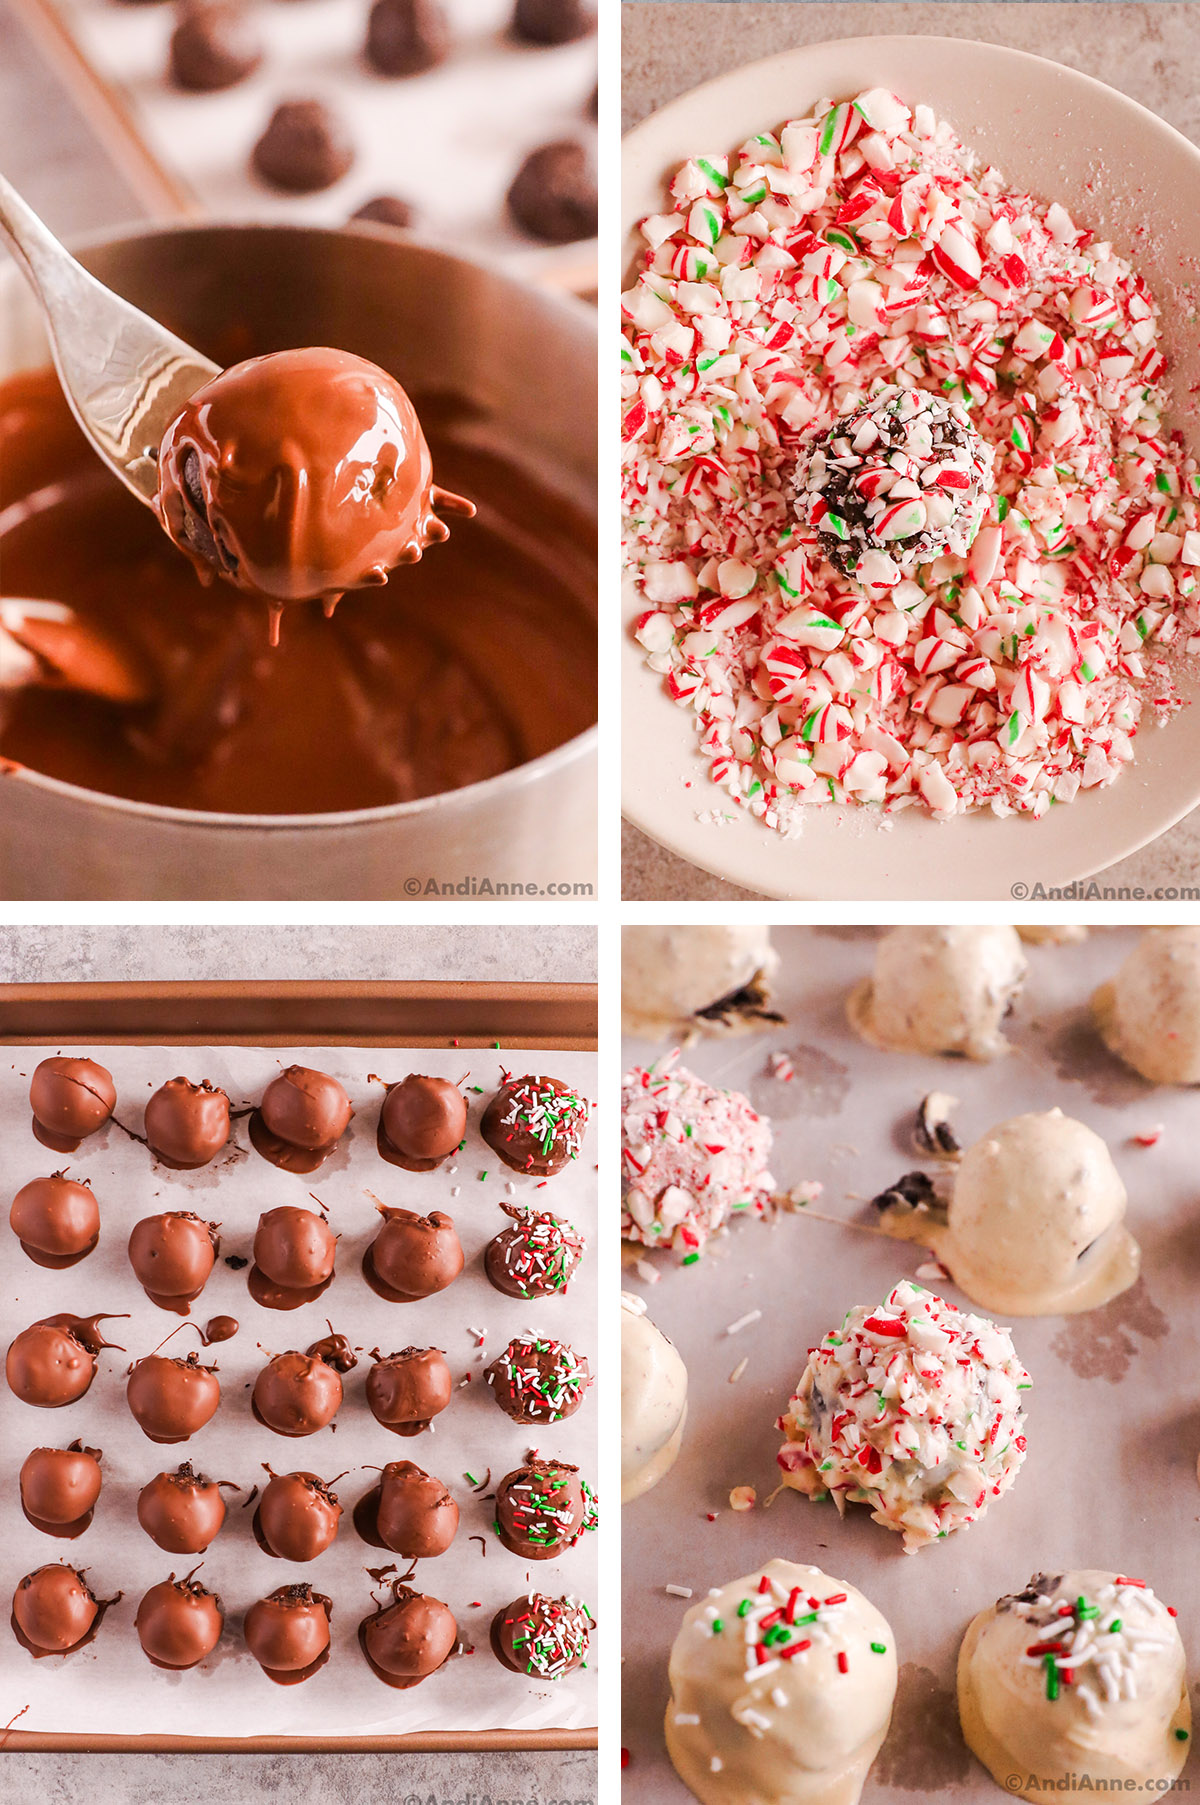 Four images: A fork holding a ball covered in melted chocolate, a plate with crushed candy canes and a boll rolled in it, a baking sheet with oreo balls covered in chocolate, some with sprinkles on top. Las is balls rolled in white chocolate, some with crushed candy canes, some with sprinkles.